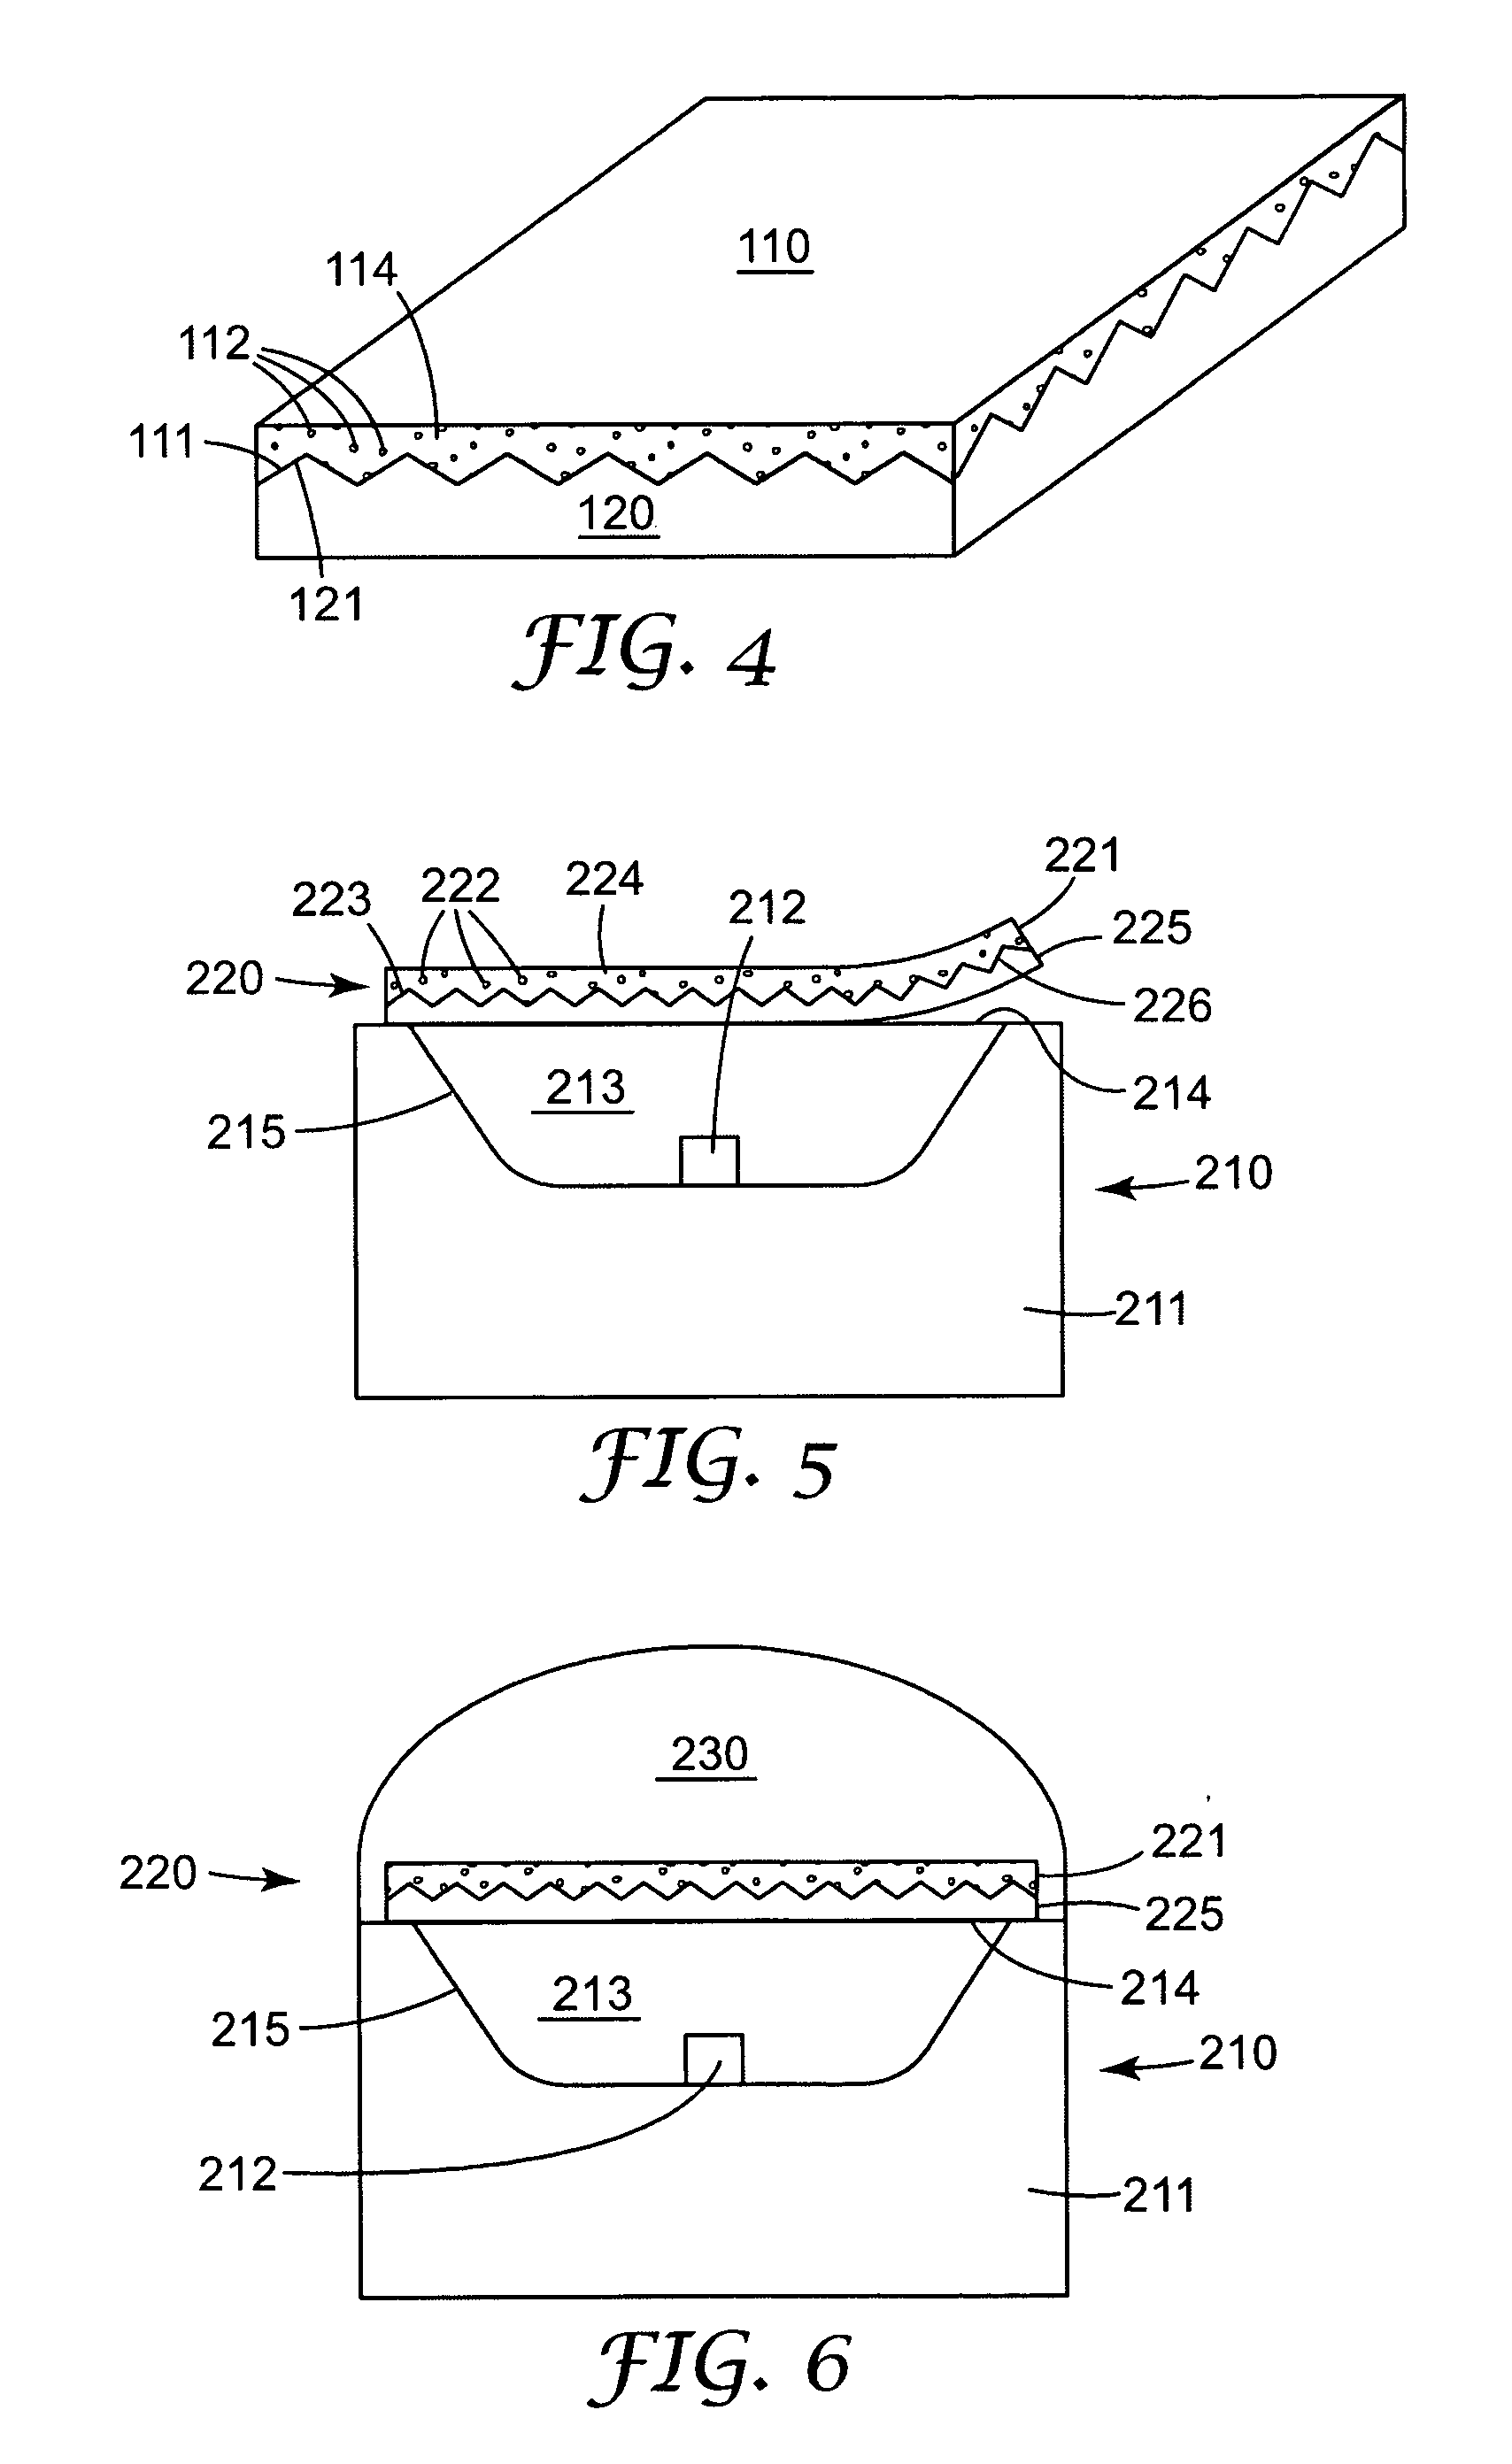 Structured phosphor tape article